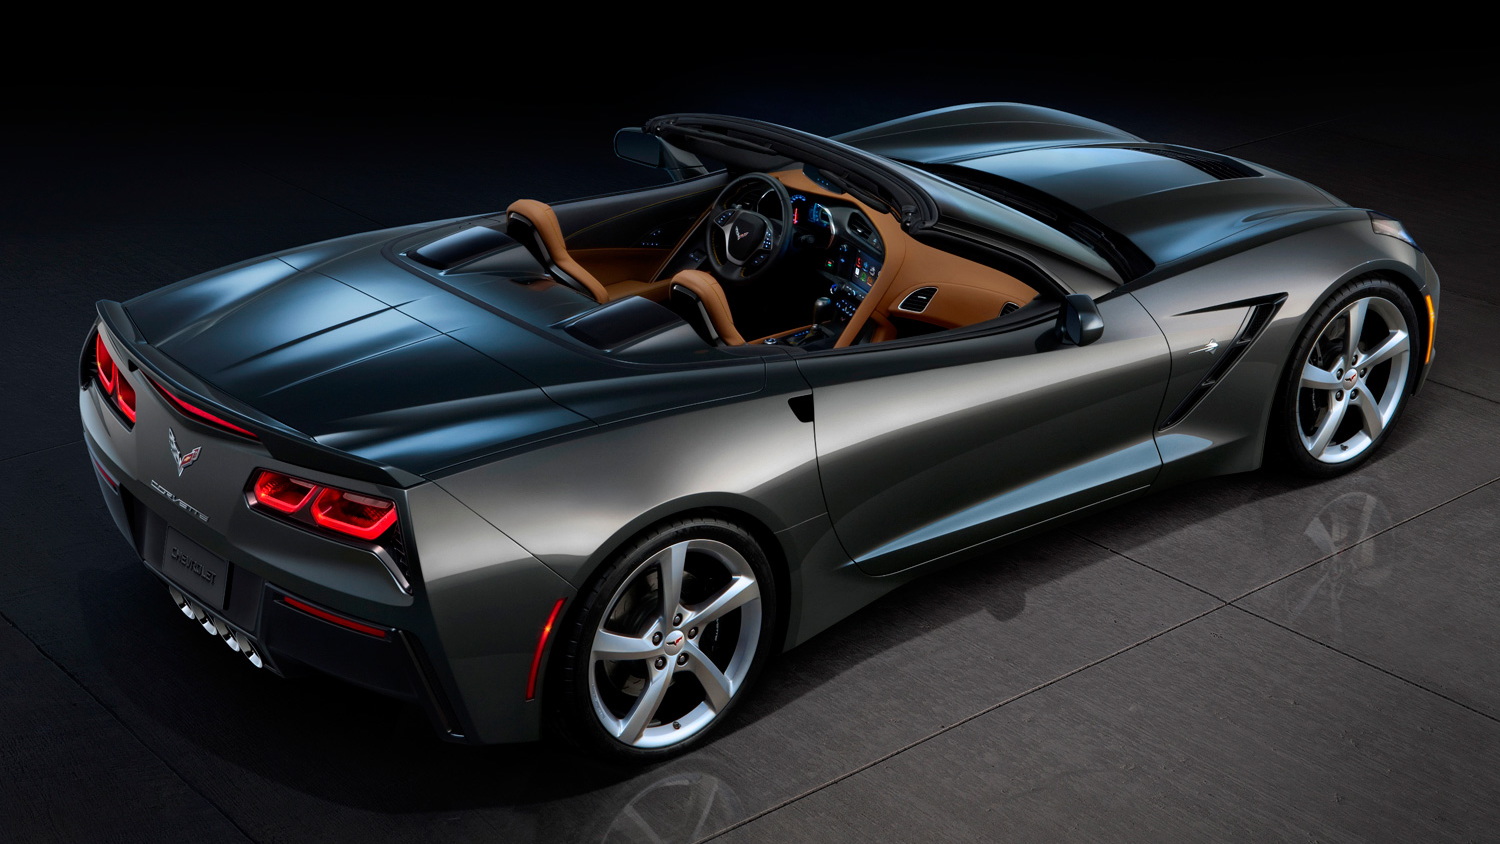 2014 Chevrolet Covette Stingray Convertible leaked images